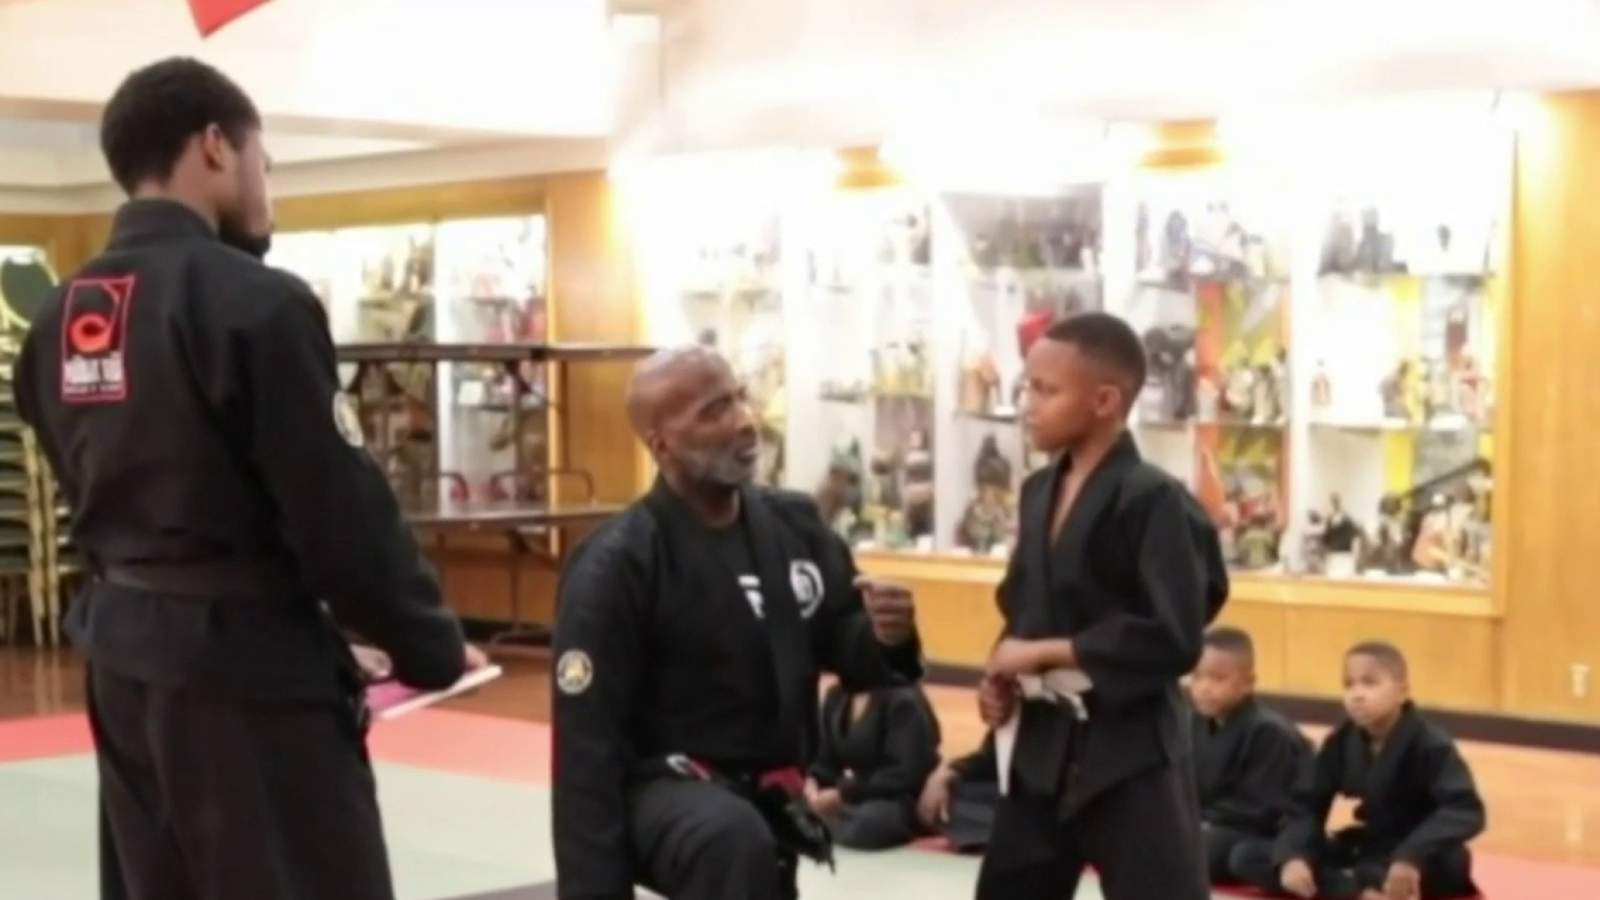 From self-defense to success: Cave of Adullam in Detroit teaches more than martial arts for young men